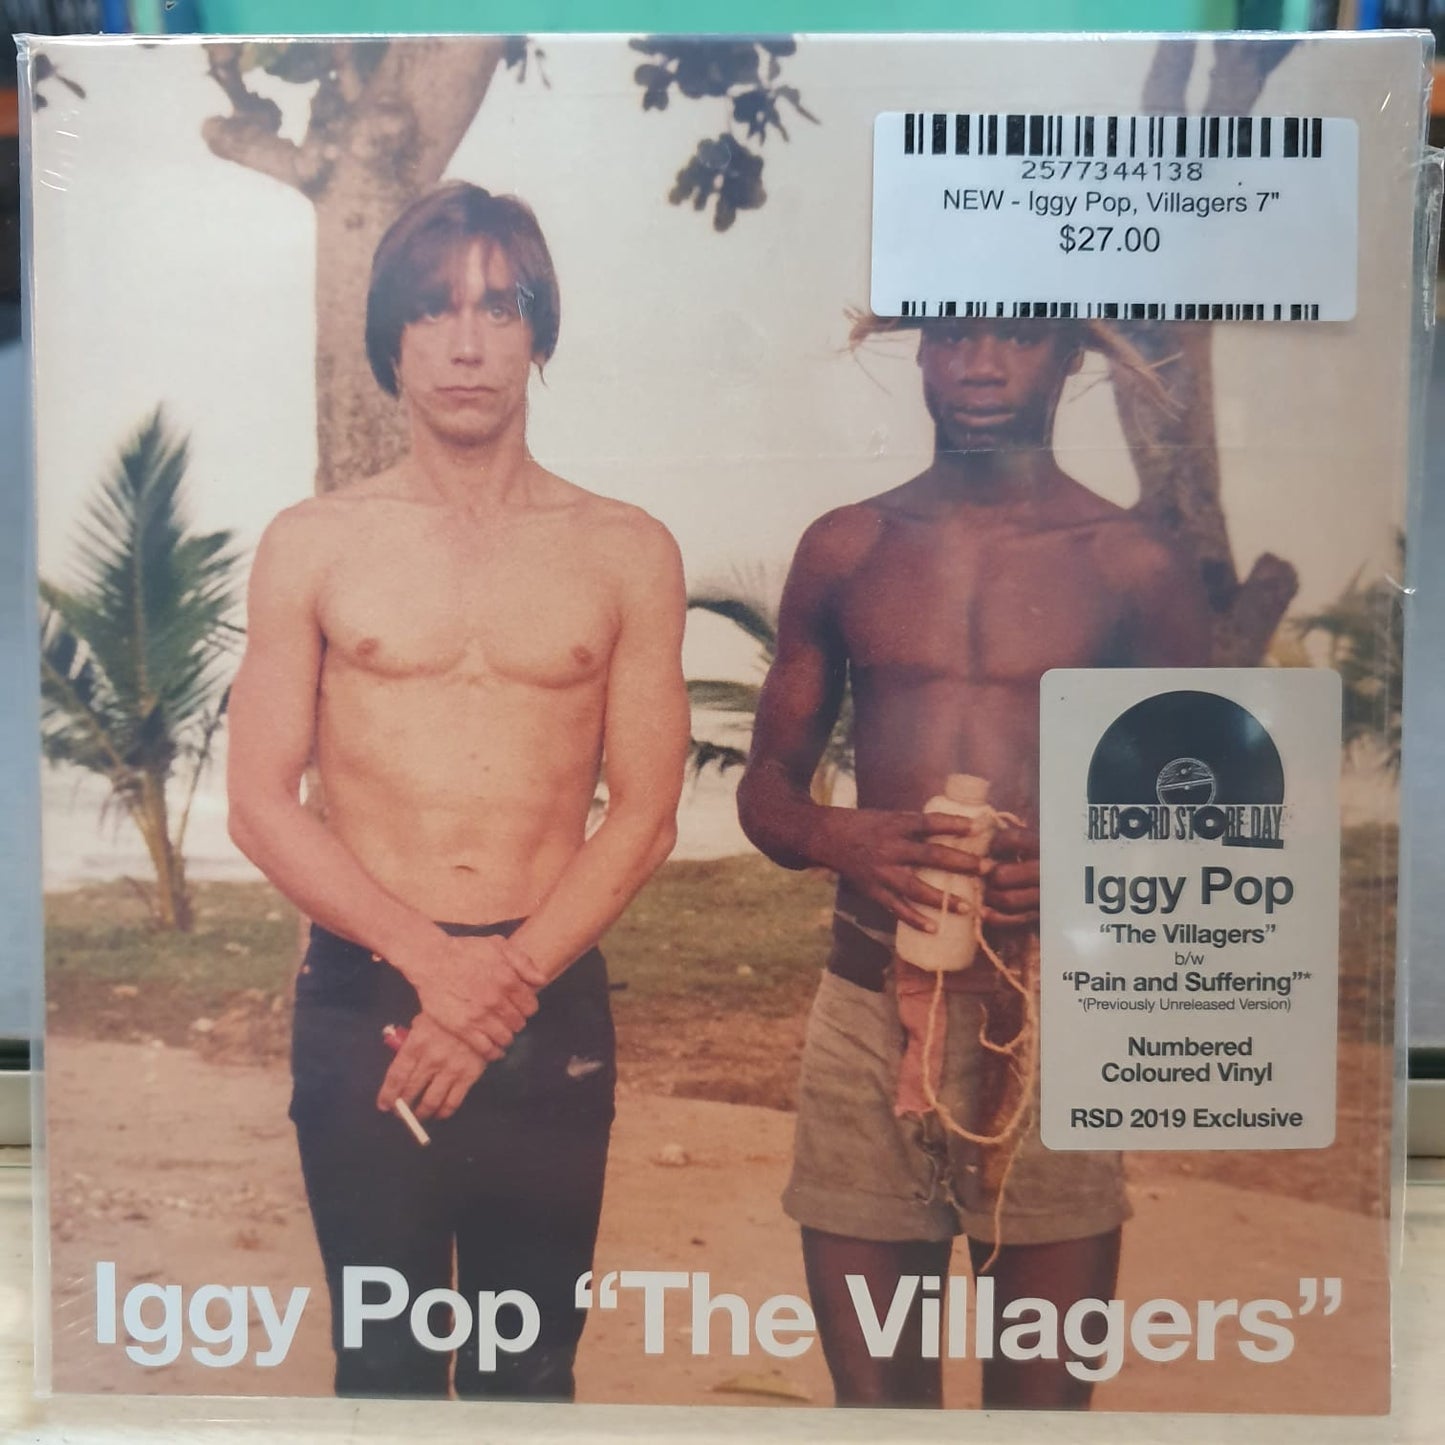 NEW - Iggy Pop, "The Villagers" b/w "Pain & Suffering" 7"